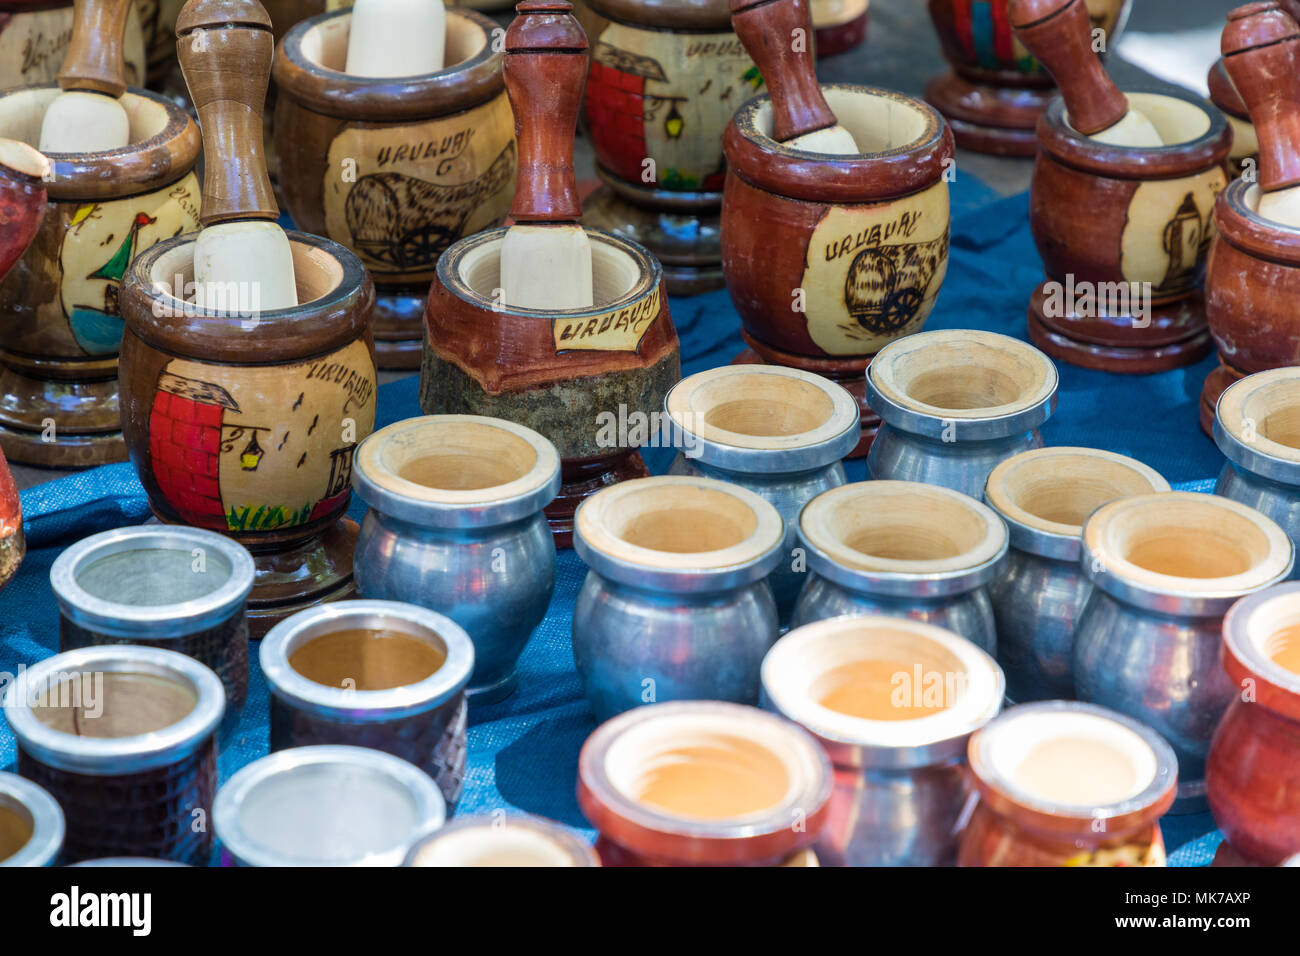 Mate gourds for sale as popular souvenirs from Argentina and Uruguay. Stock Photo